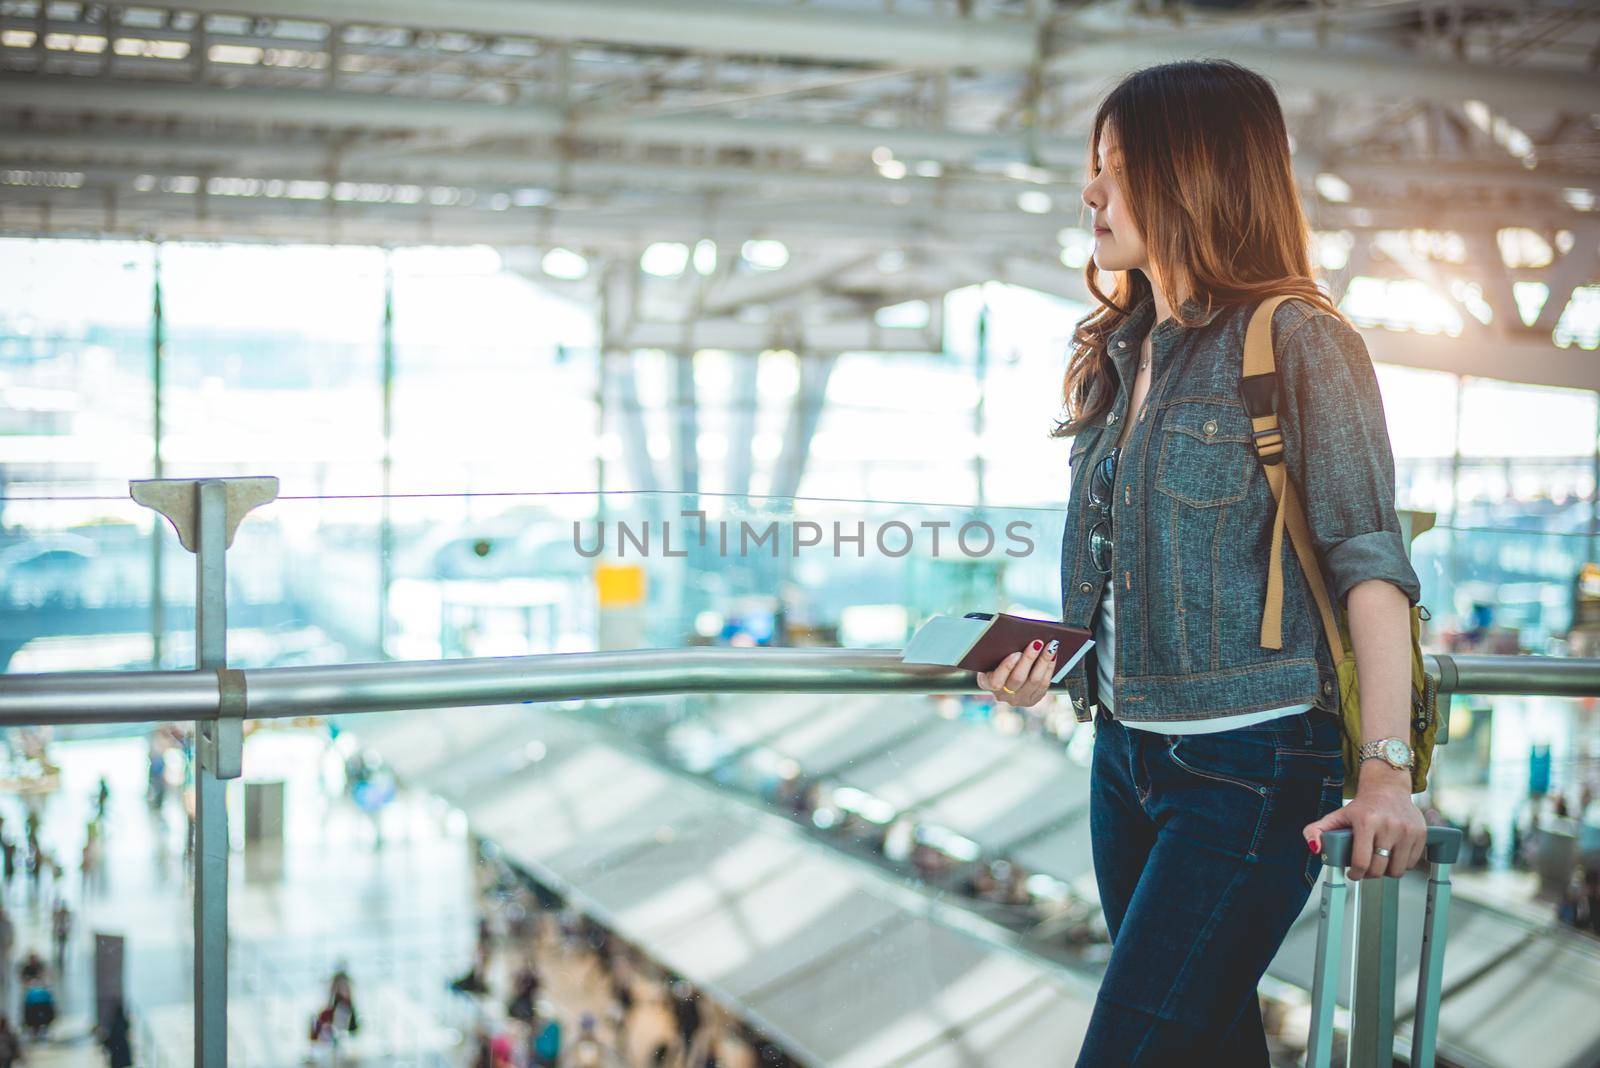 Beauty female tourists holding passport and waiting for flight to take off at airport. People and lifestyles concept. Travel and Adventure theme. Side view portrait. by MiniStocker